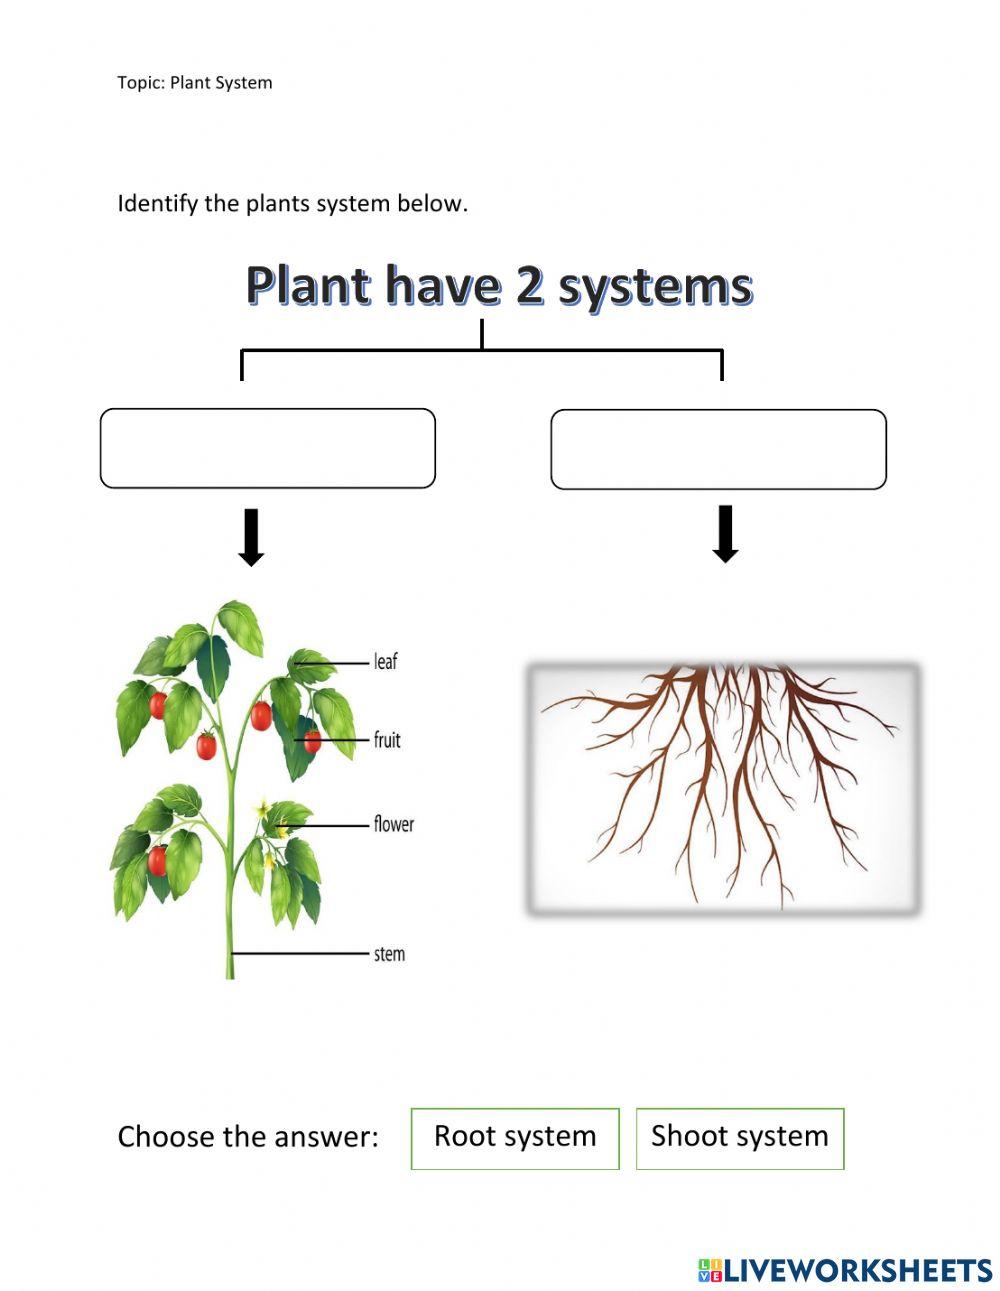 Parts of the root